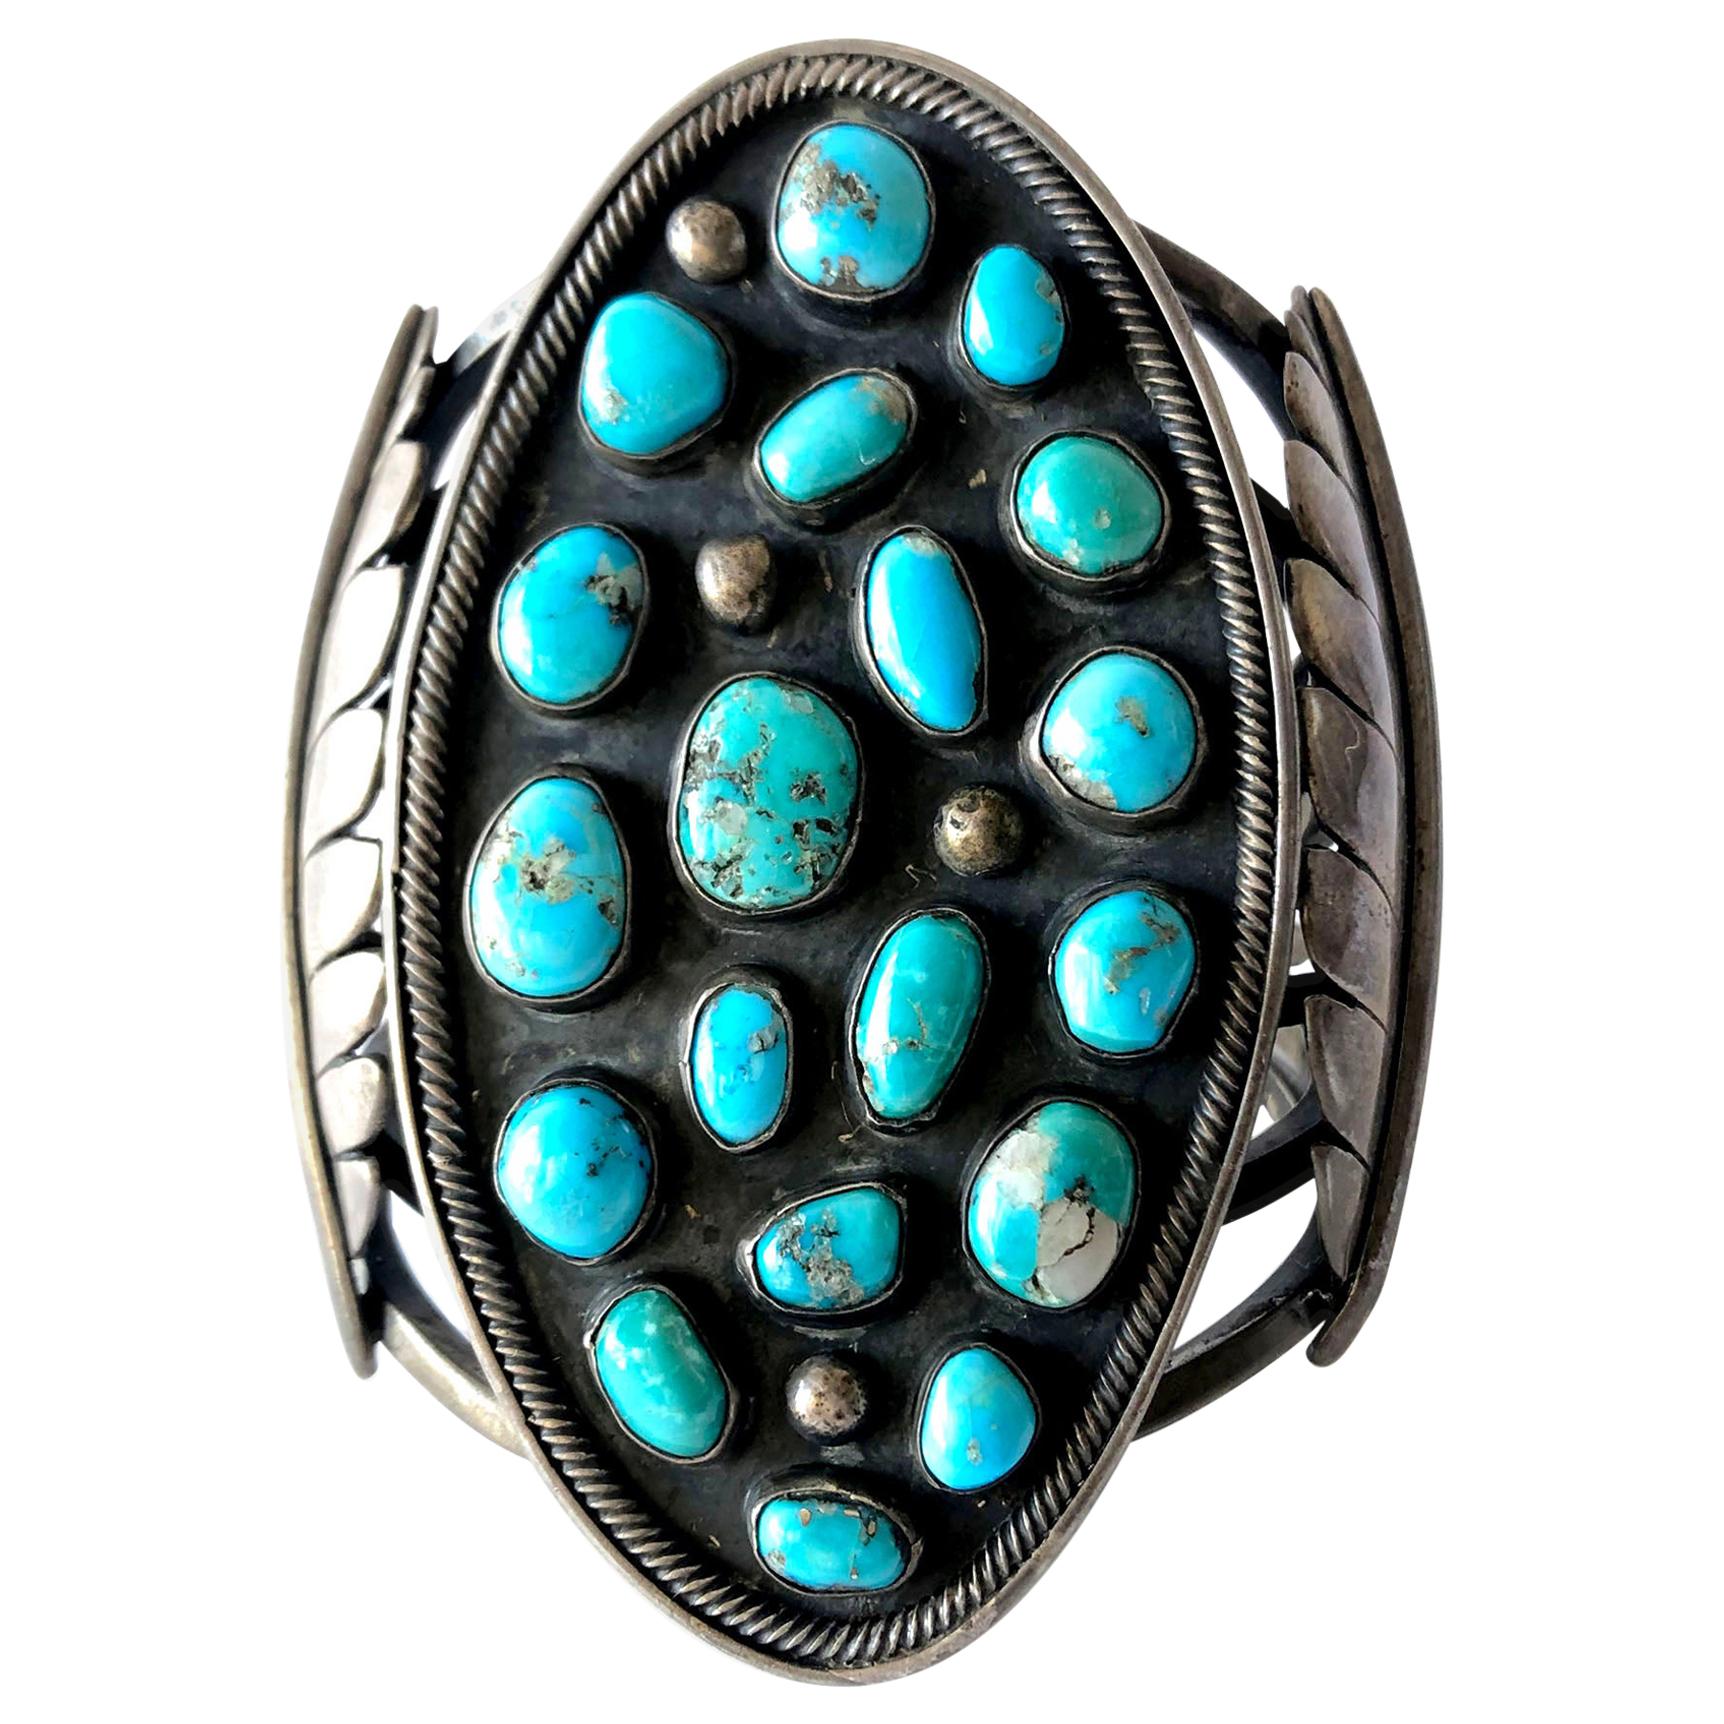 Massive Gentlemans Sterling Silver and Turquoise Navajo Cuff Bracelet